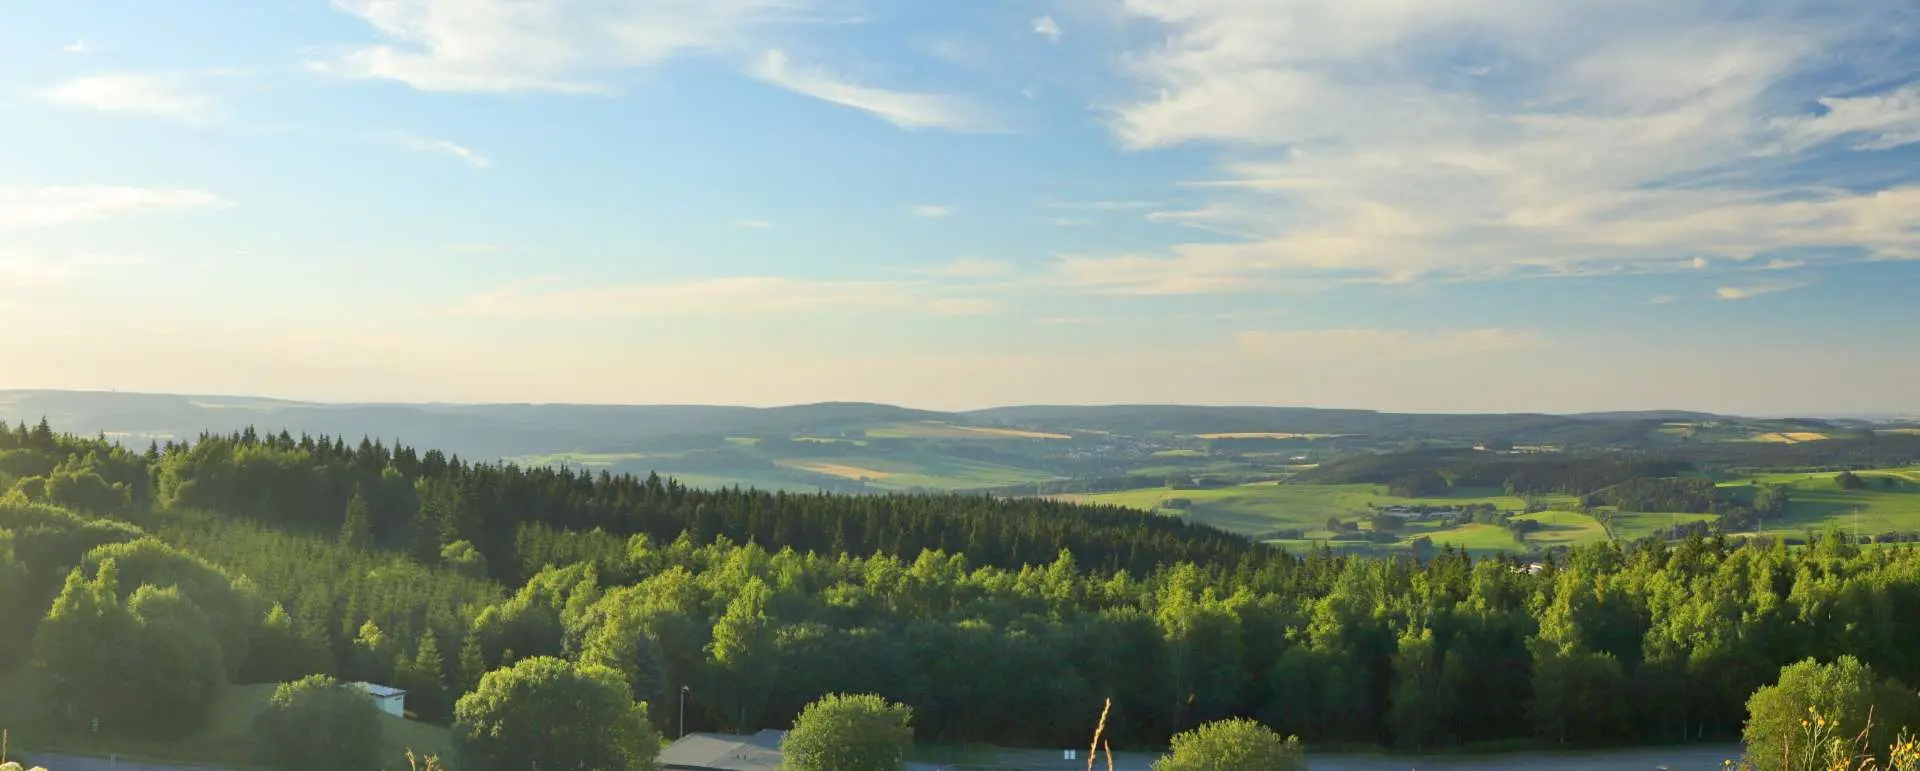 Ore Mountains - the destination for students